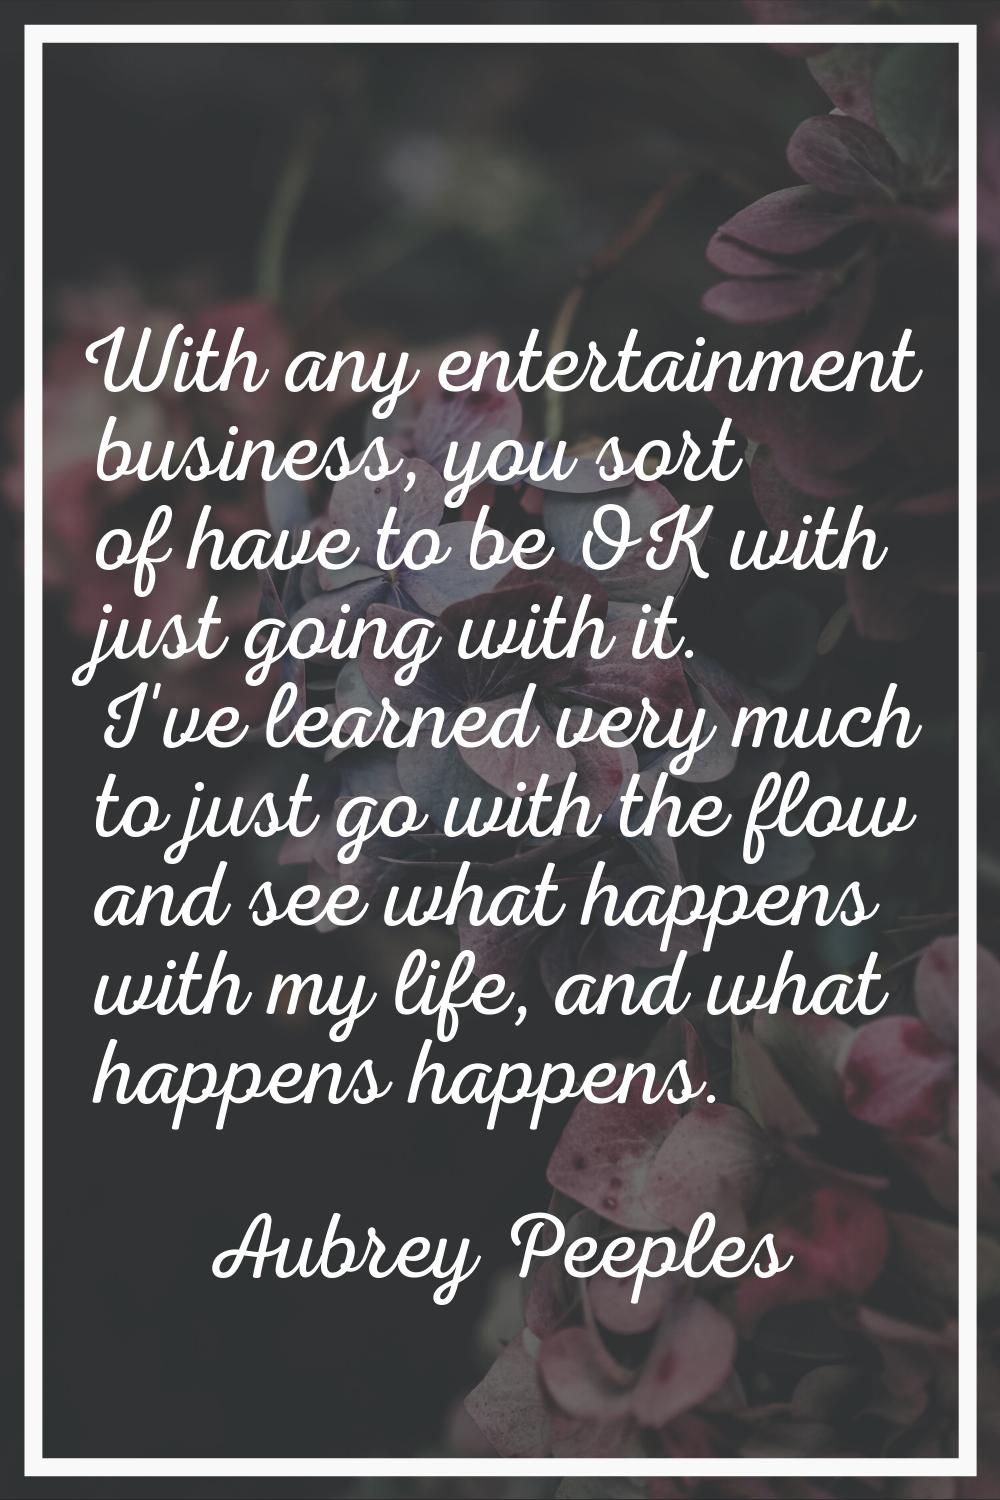 With any entertainment business, you sort of have to be OK with just going with it. I've learned ve